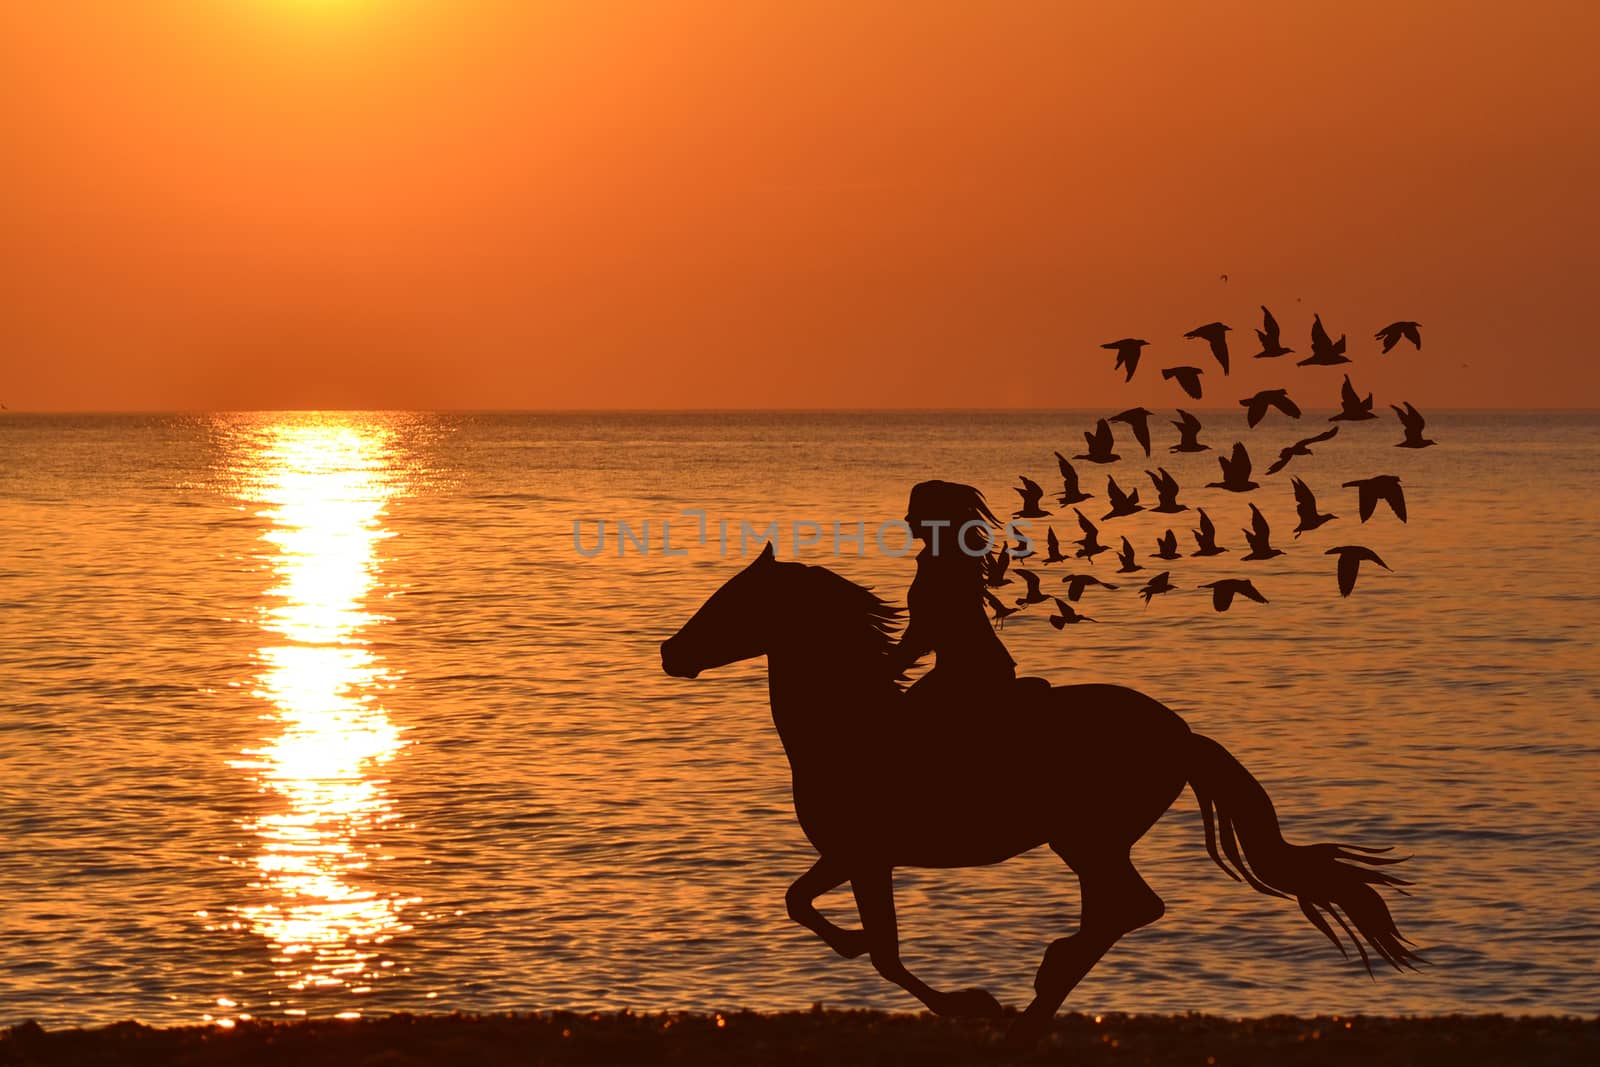 Abstract woman riding a horse with birds flying from her hair at by hibrida13